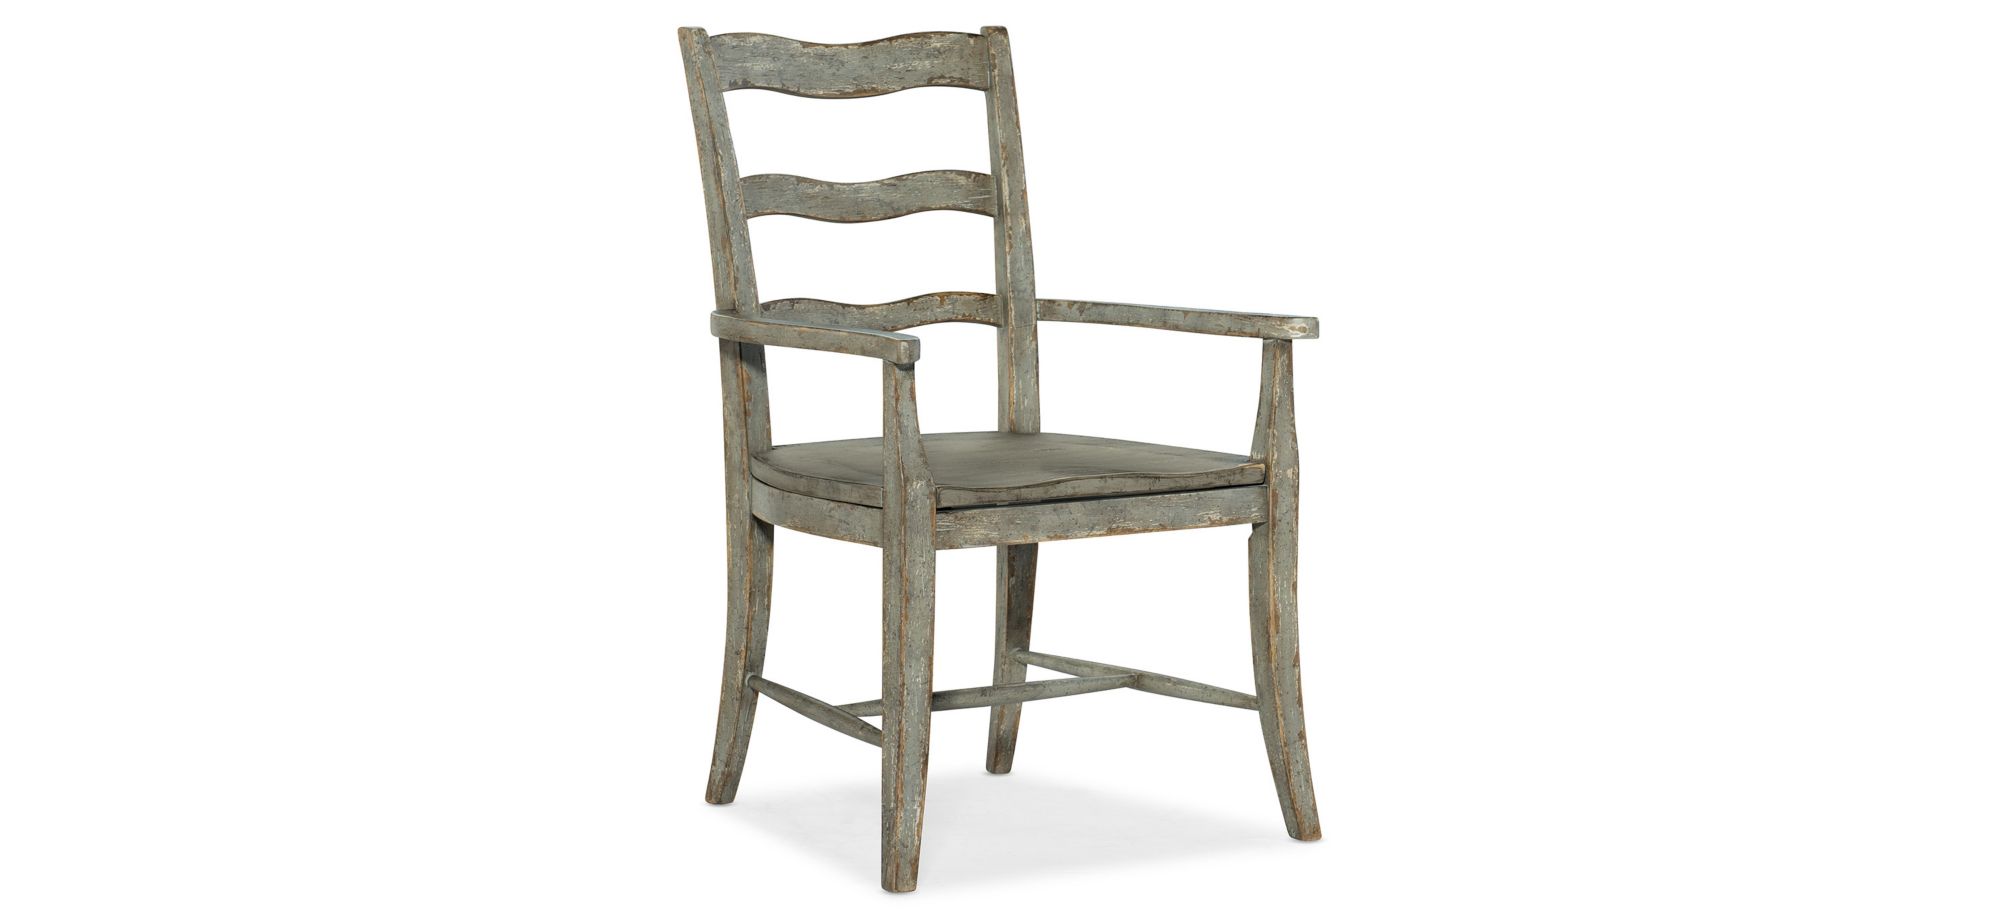 Alfresco La Riva Ladder Back Arm Chair - Set of 2 in Oyster by Hooker Furniture